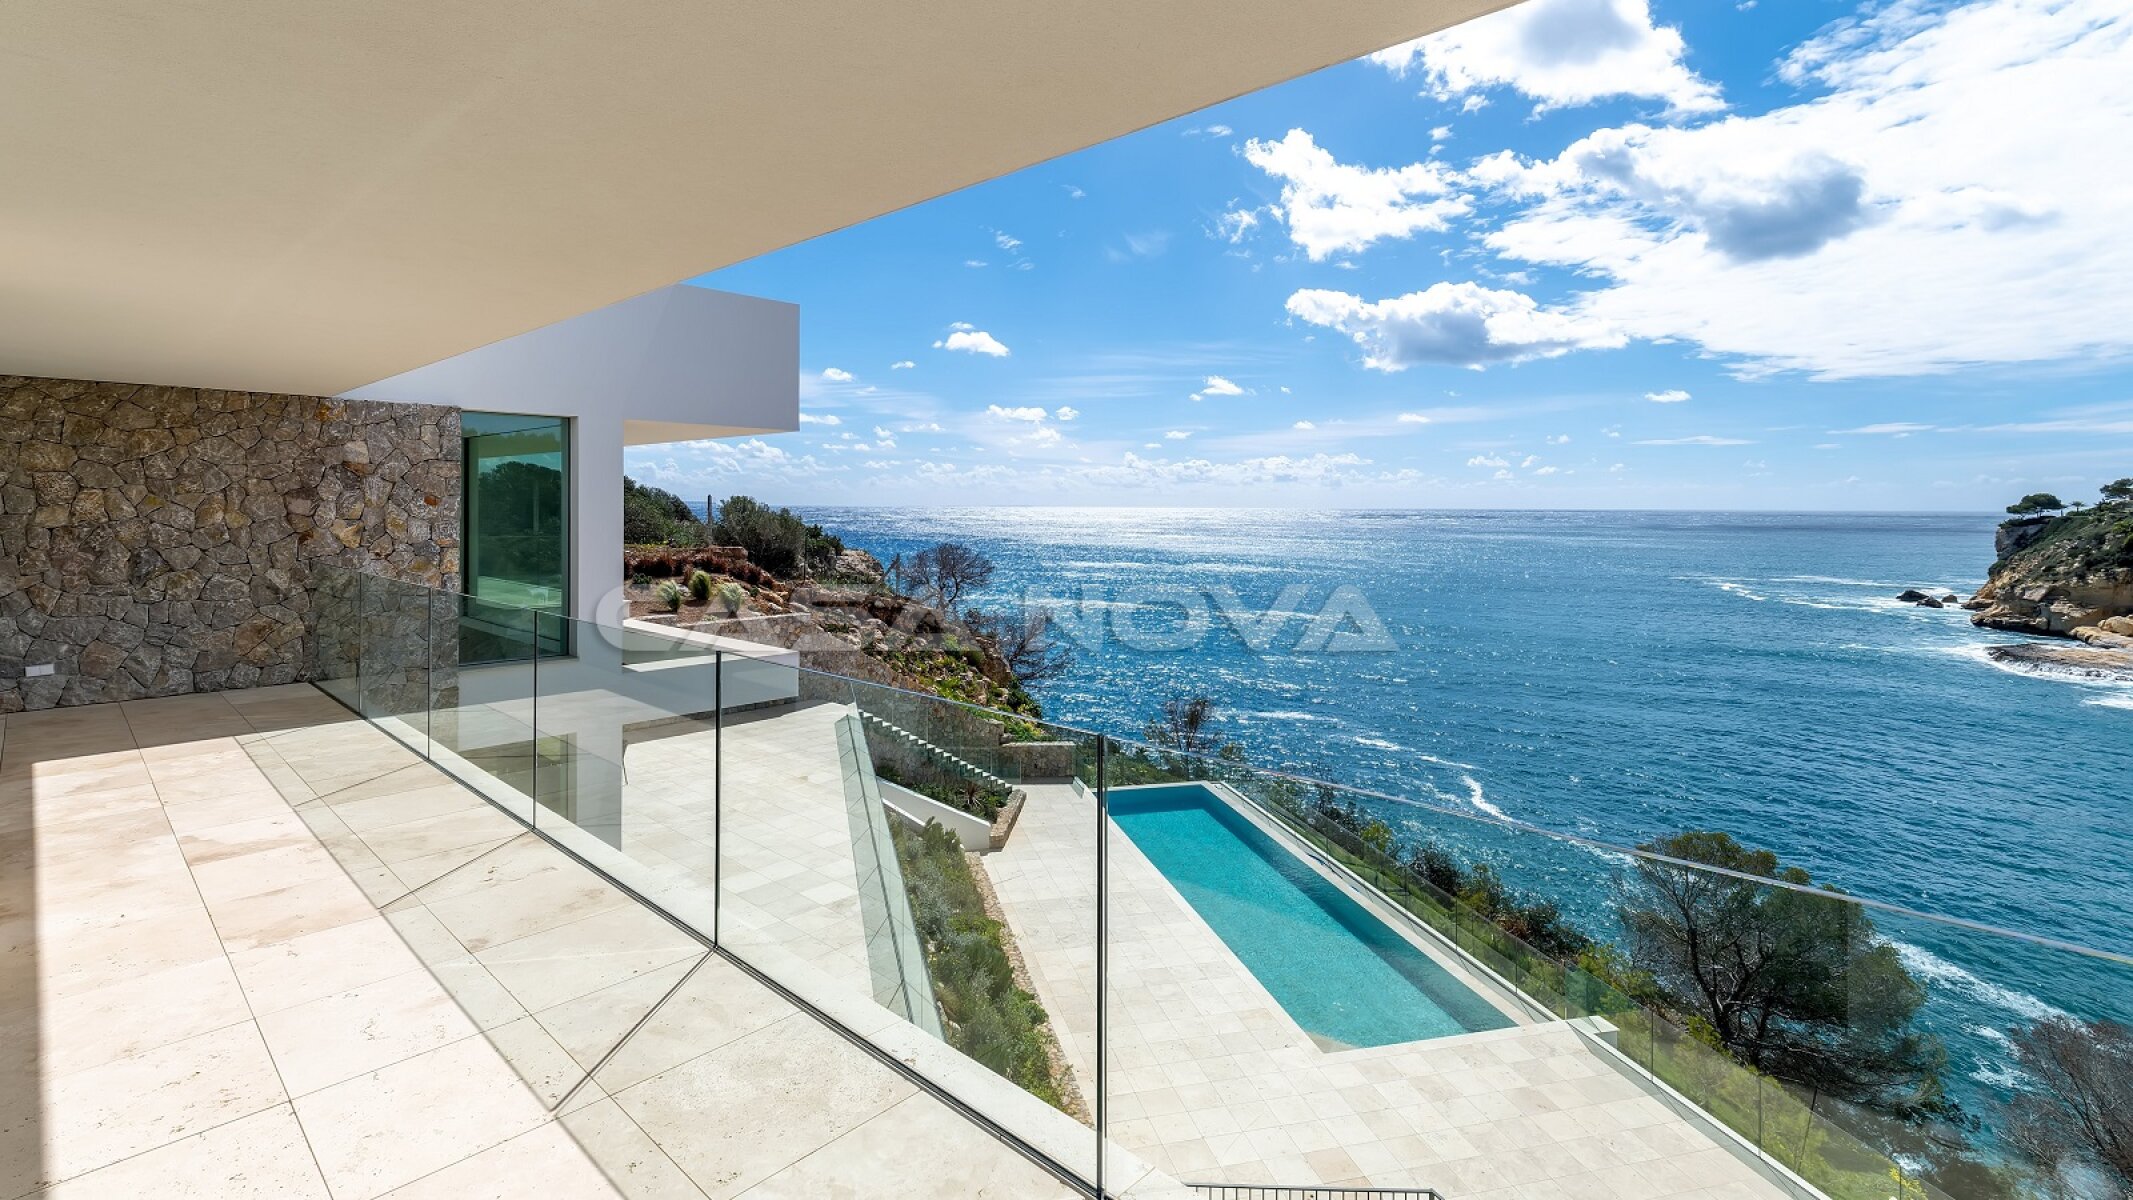 Luxurious new-build villa with stunning views and sea access